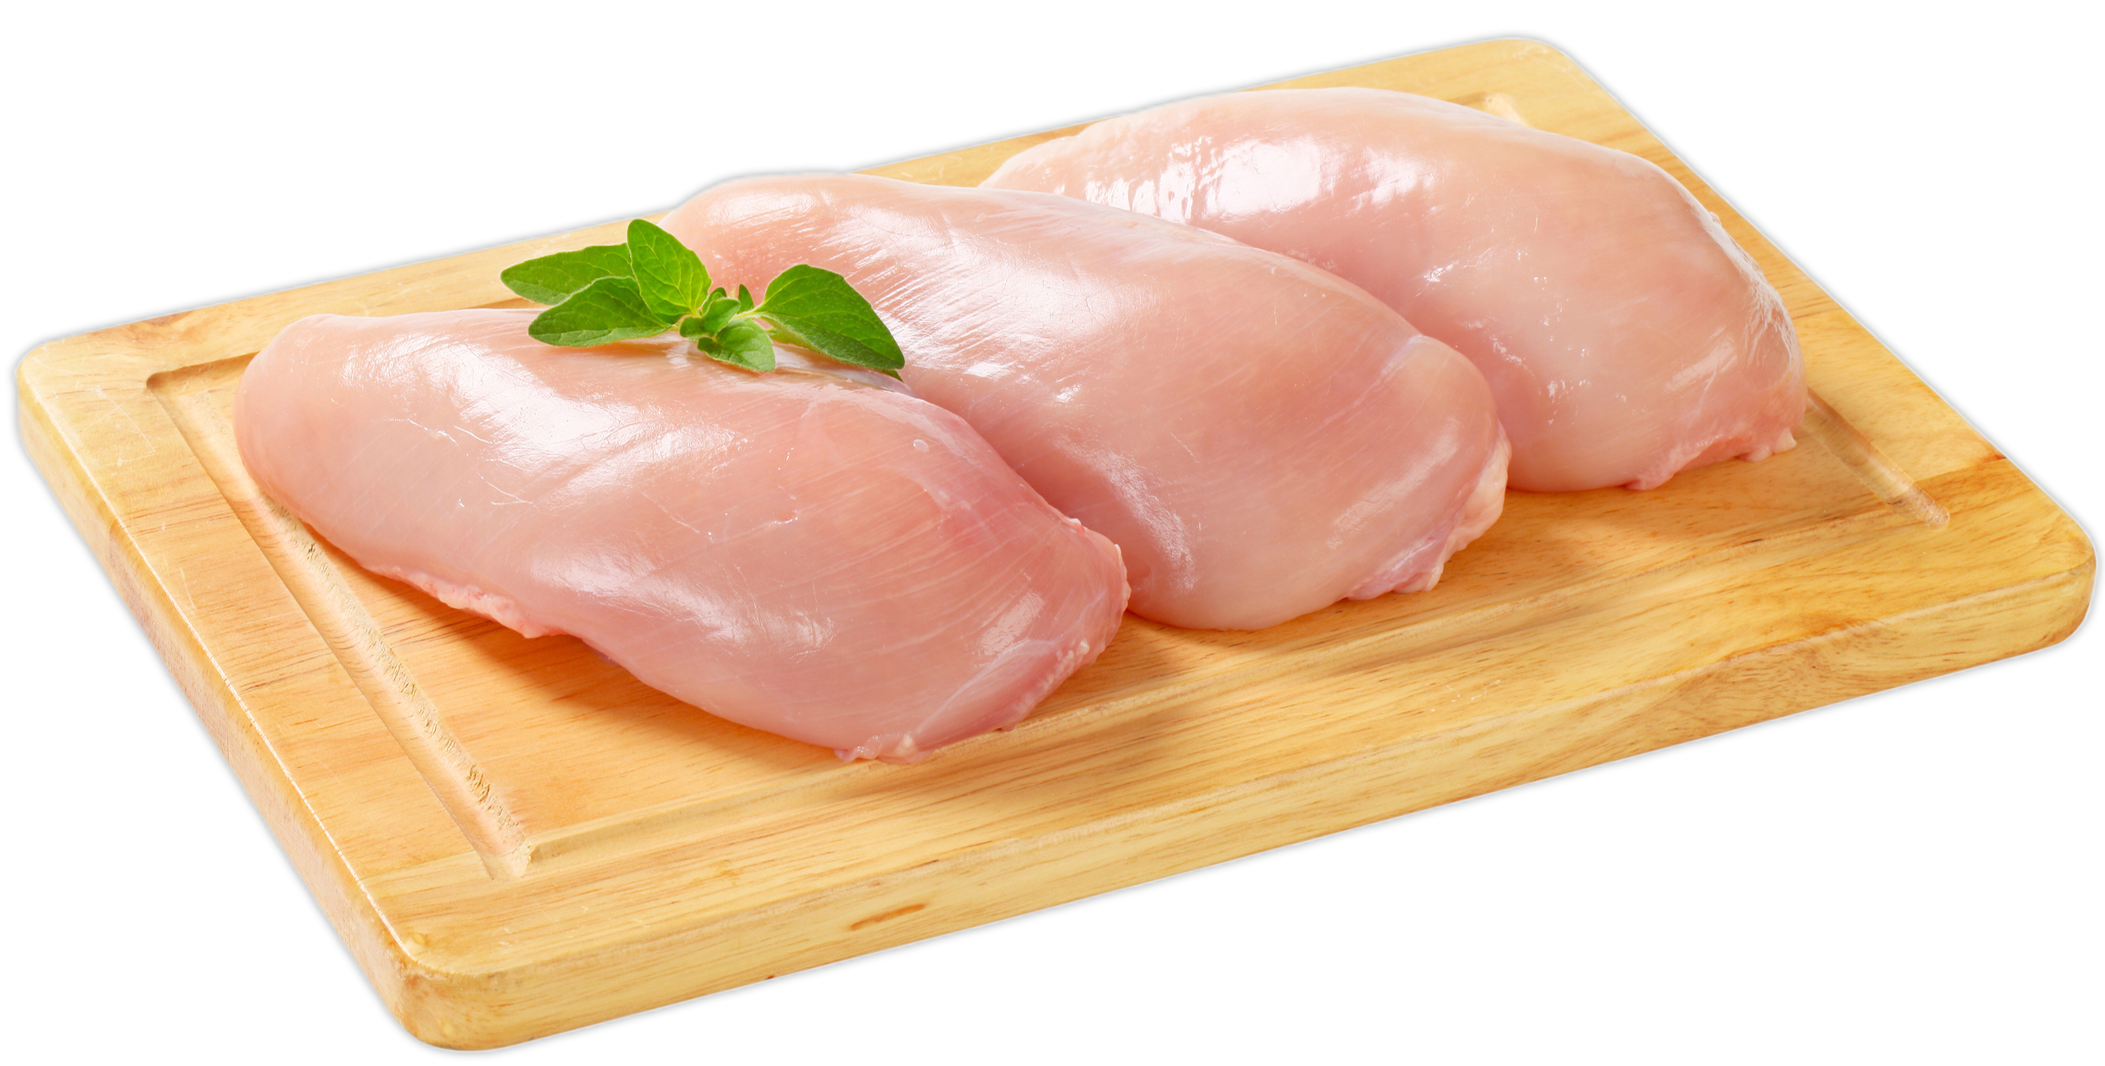 Air chilled simply better. Meat clipart chicken breast